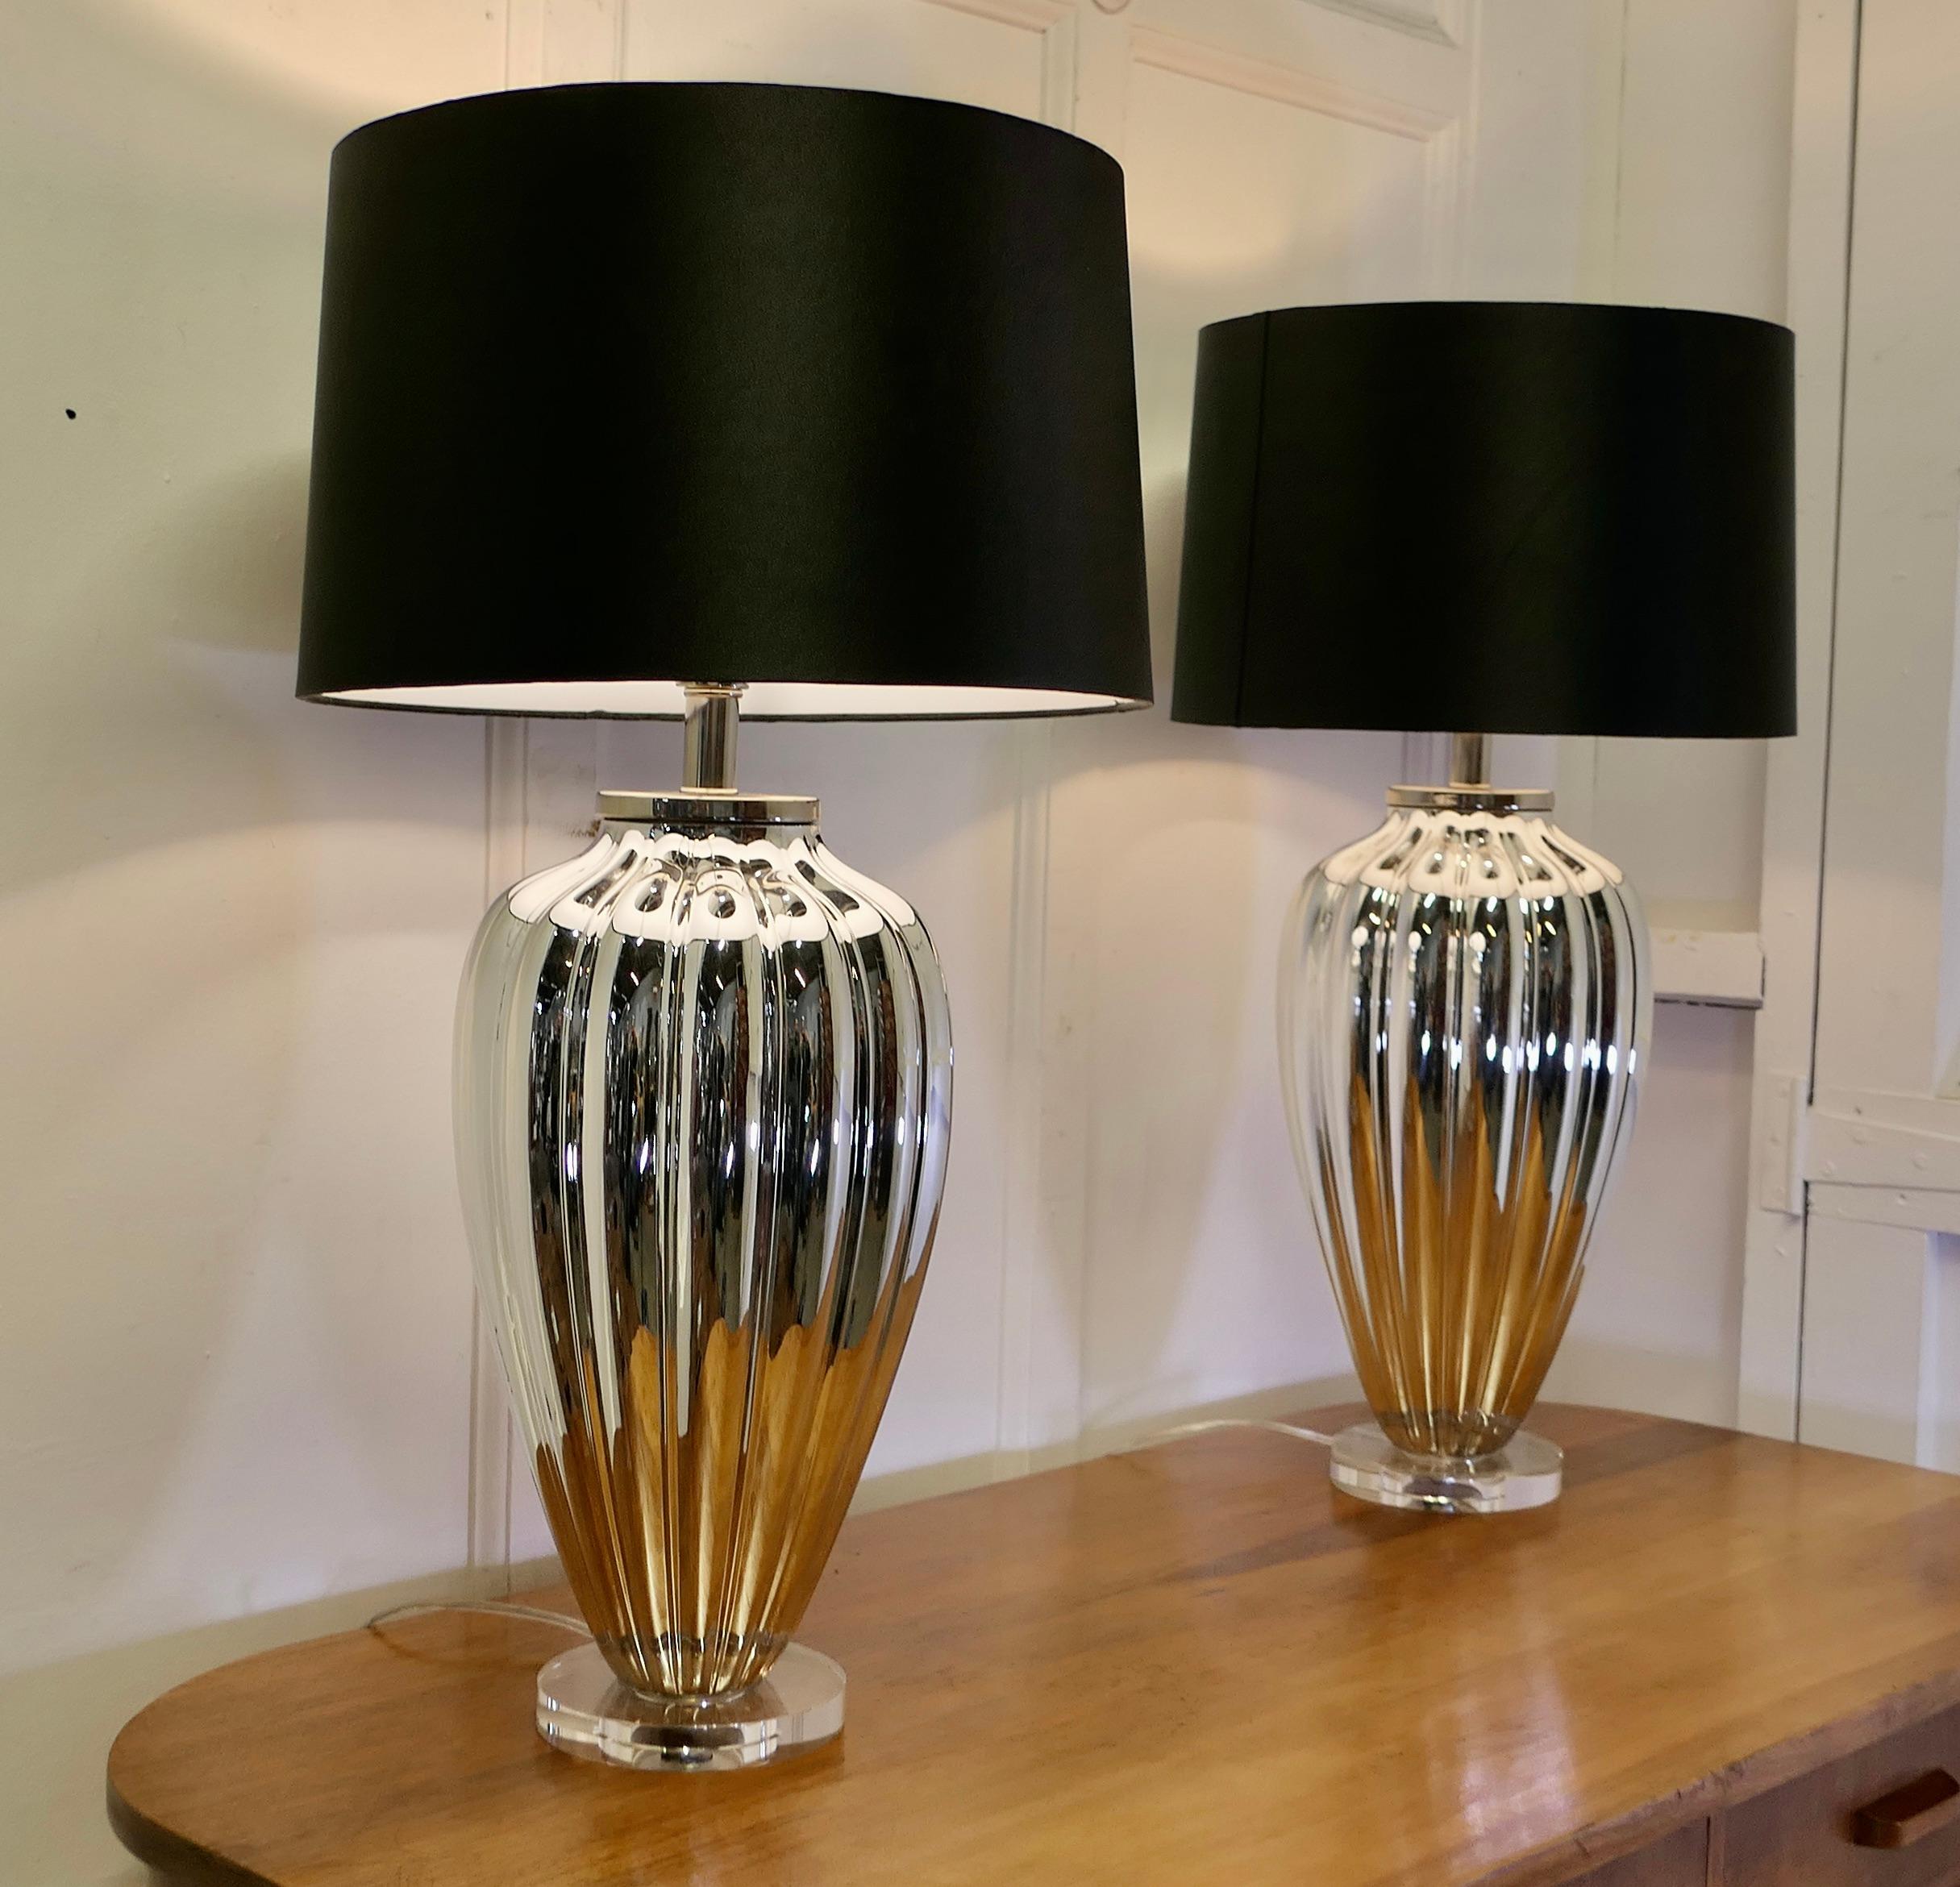 A Pair of Silvered Glass Table Lamps  In Good Condition For Sale In Chillerton, Isle of Wight